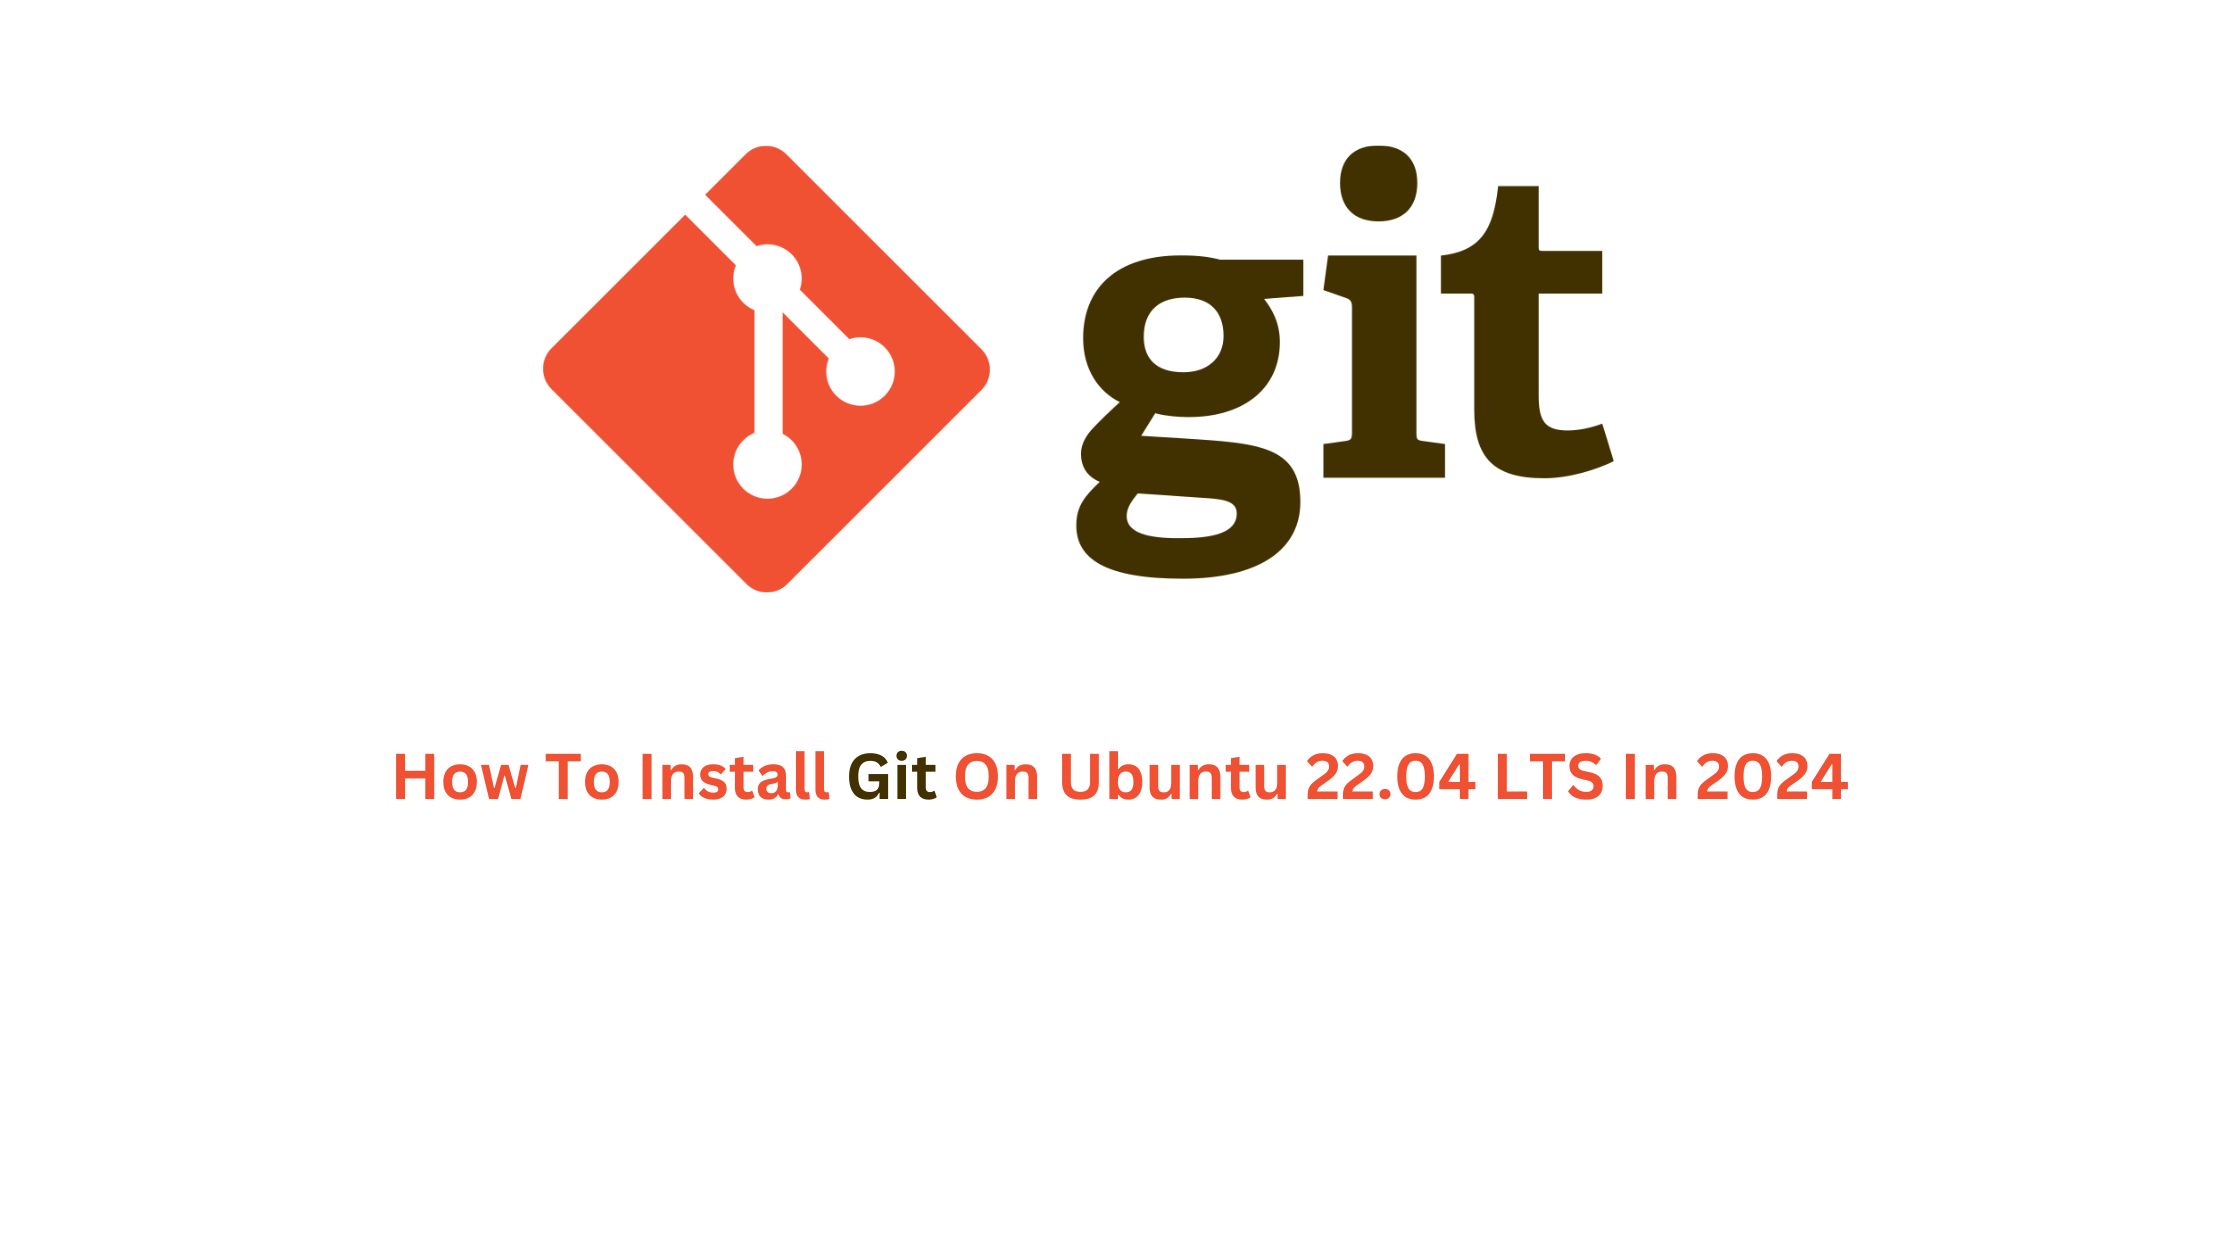 How To Install Git On Ubuntu 22.04 LTS In 2024